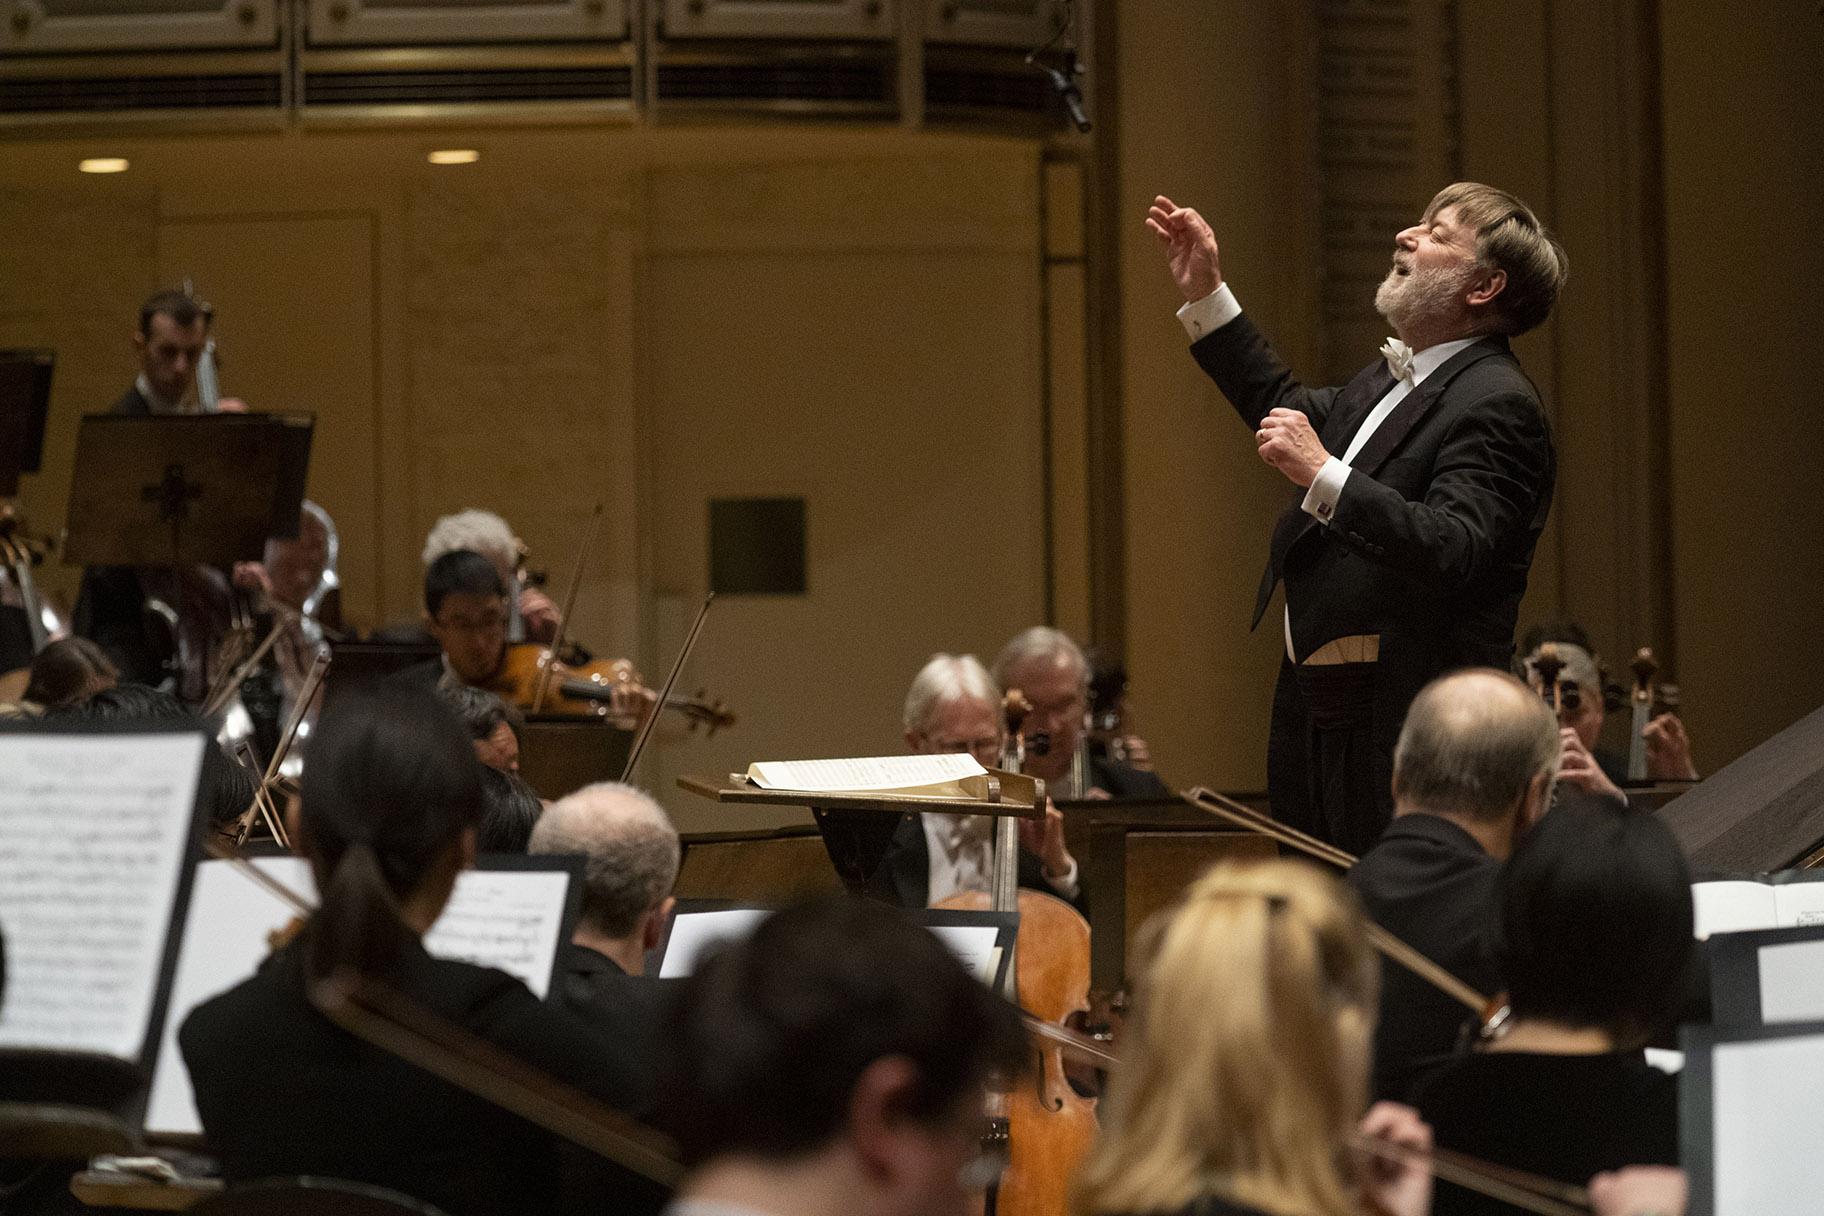 Sir Andrew Davis leads the Chicago Symphony Orchestra in a program of works by Tippett and Beethoven at Symphony Center on Jan. 30, 2020. (Photo credit: Todd Rosenberg)